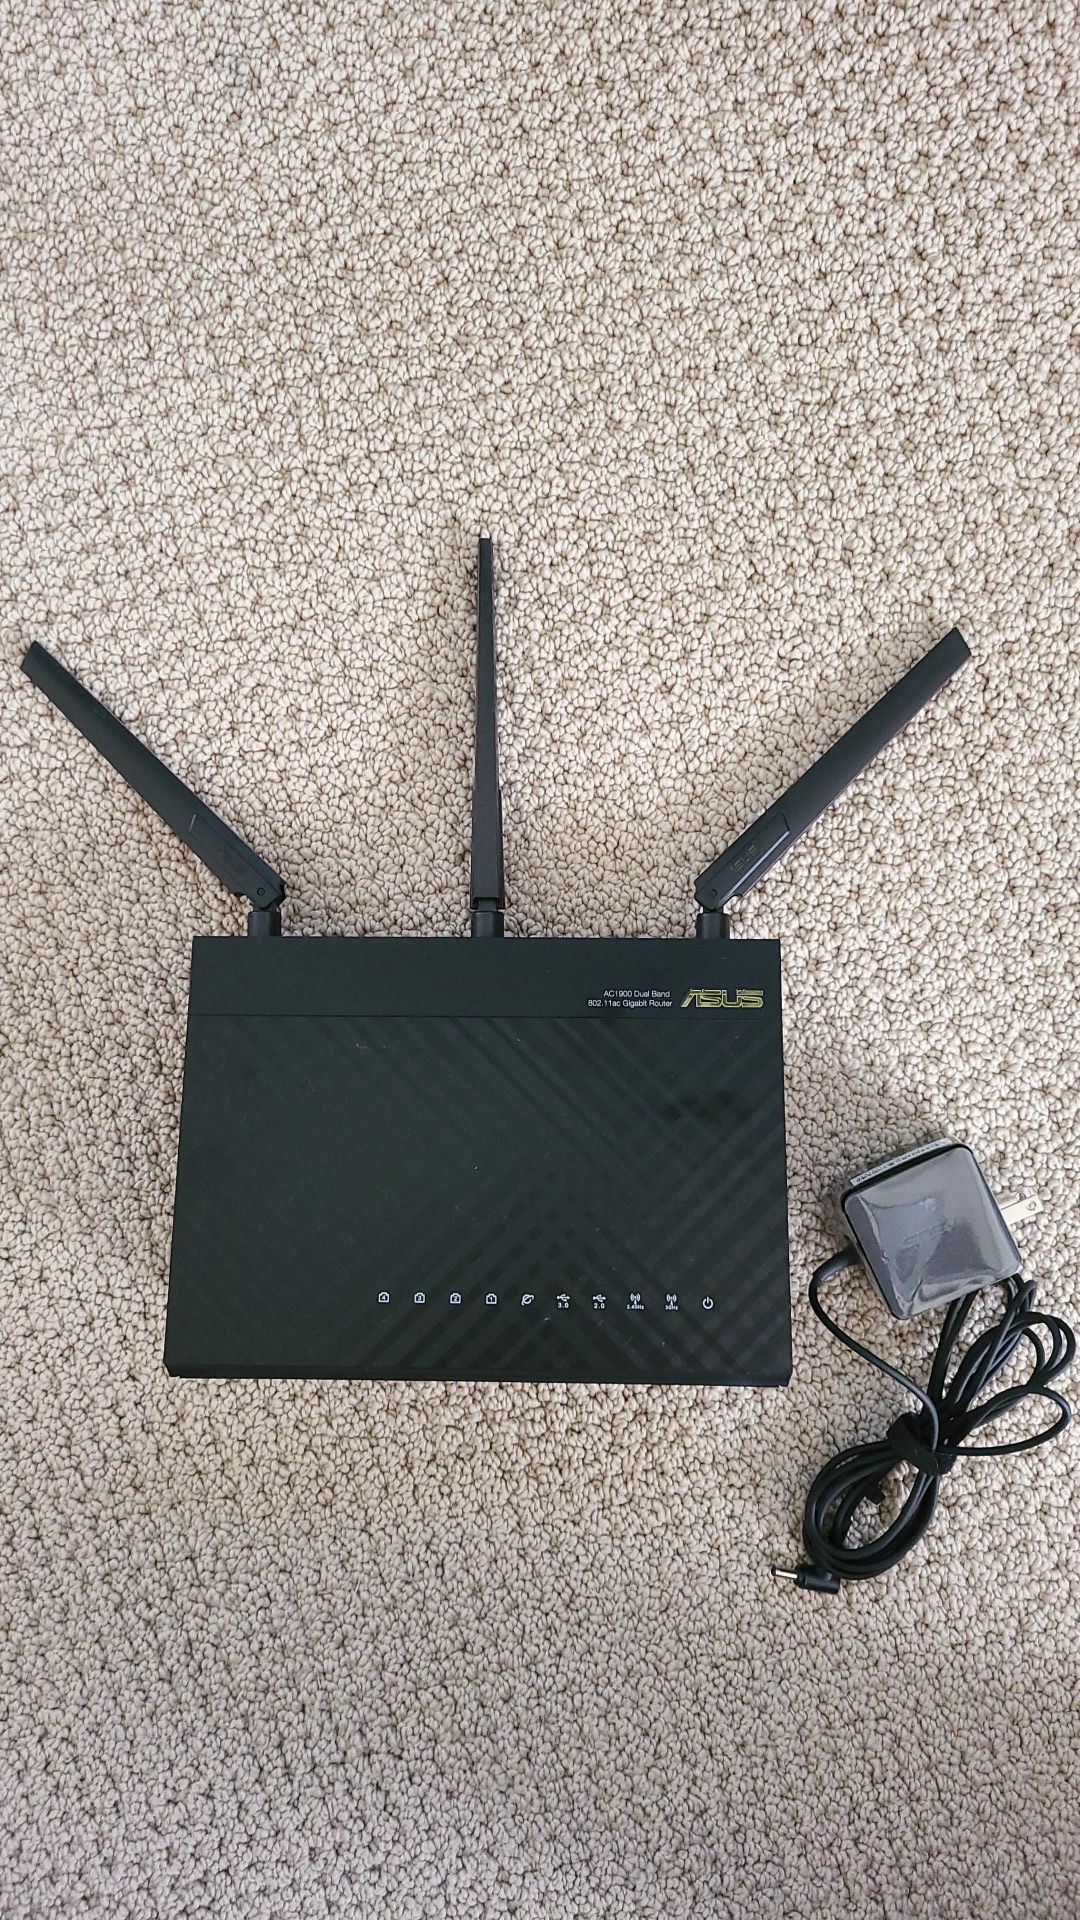 Asus AC1900 RT-AC68P WiFi Router